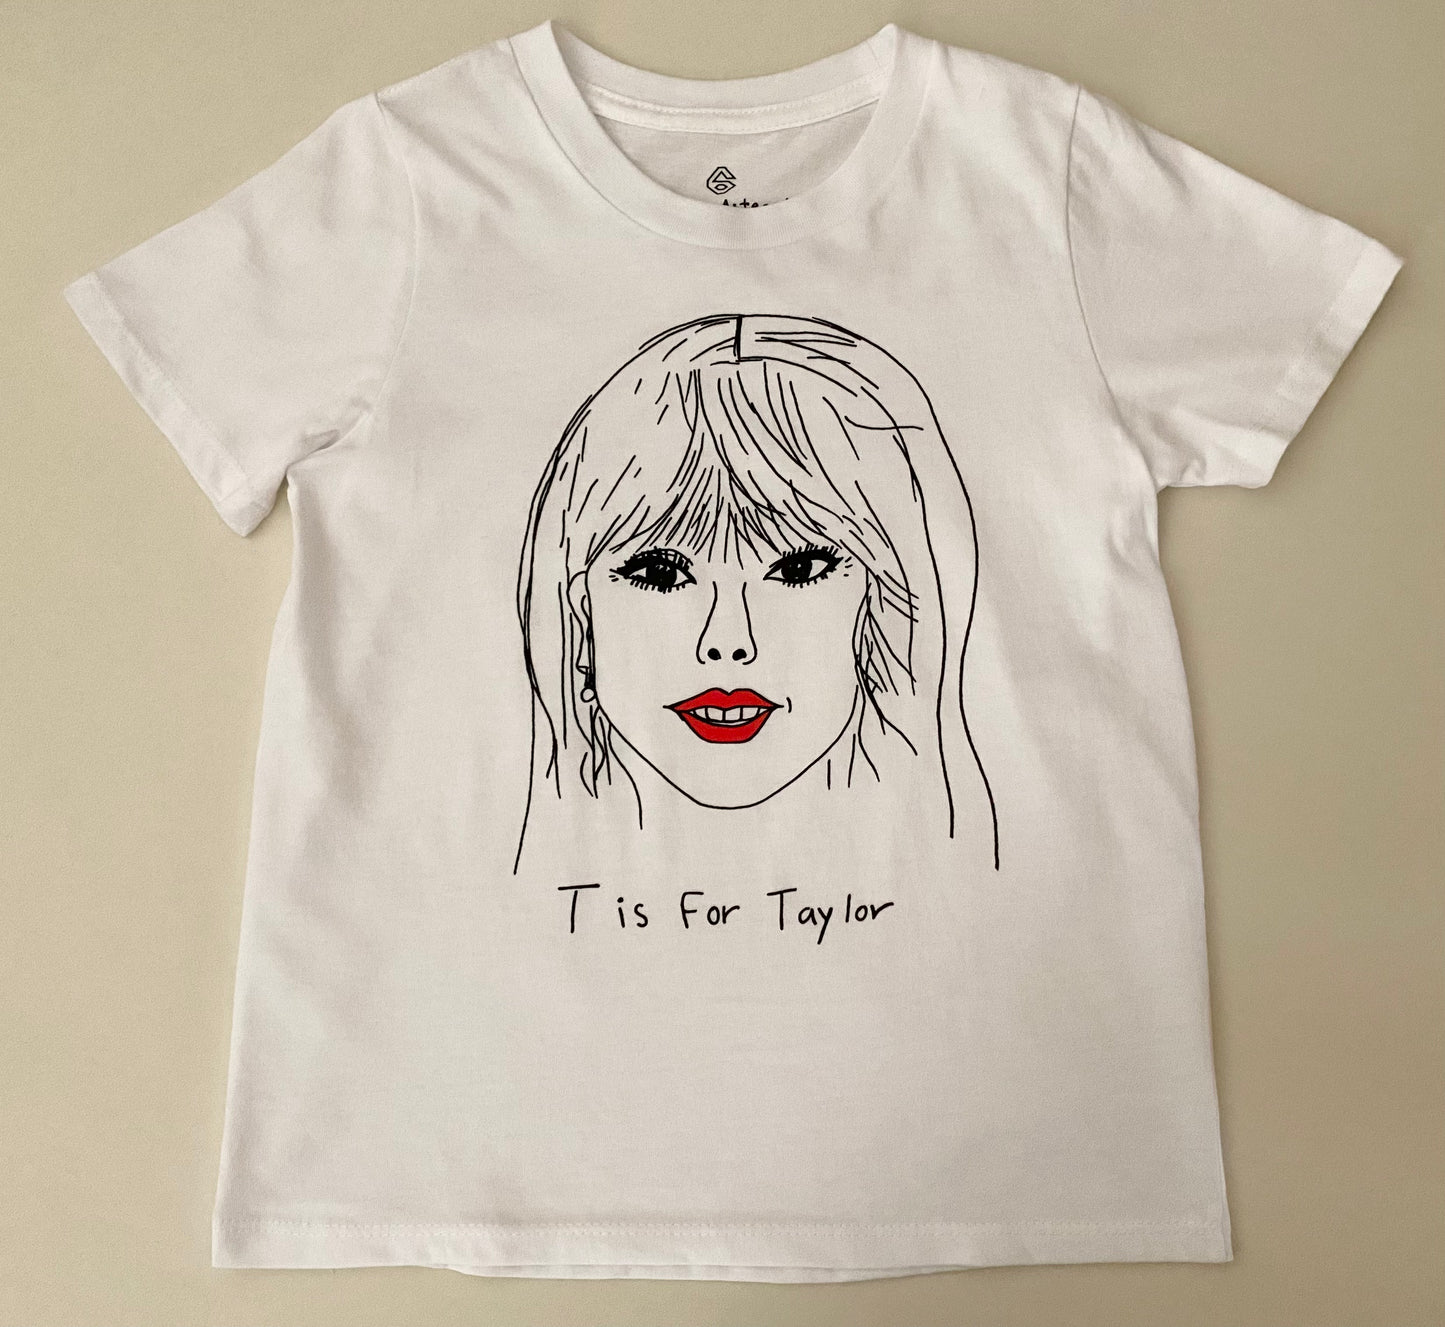 T is for Taylor Tee by Anchors-n-Asteroids